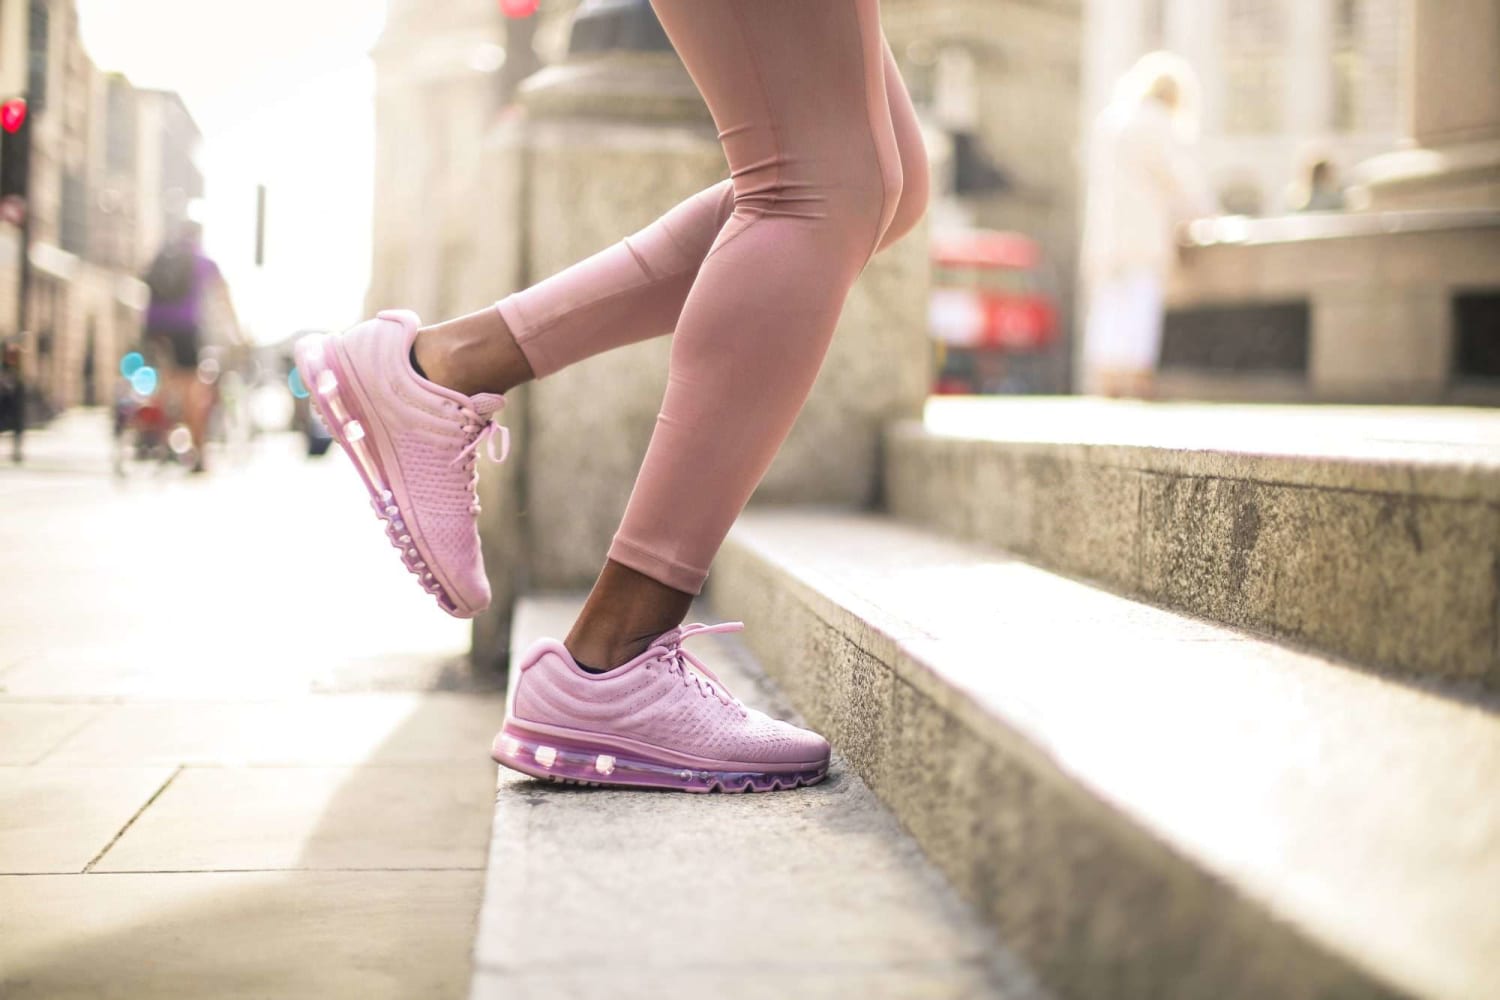 The 12 Best Running Shoes With Arch Support of 2022